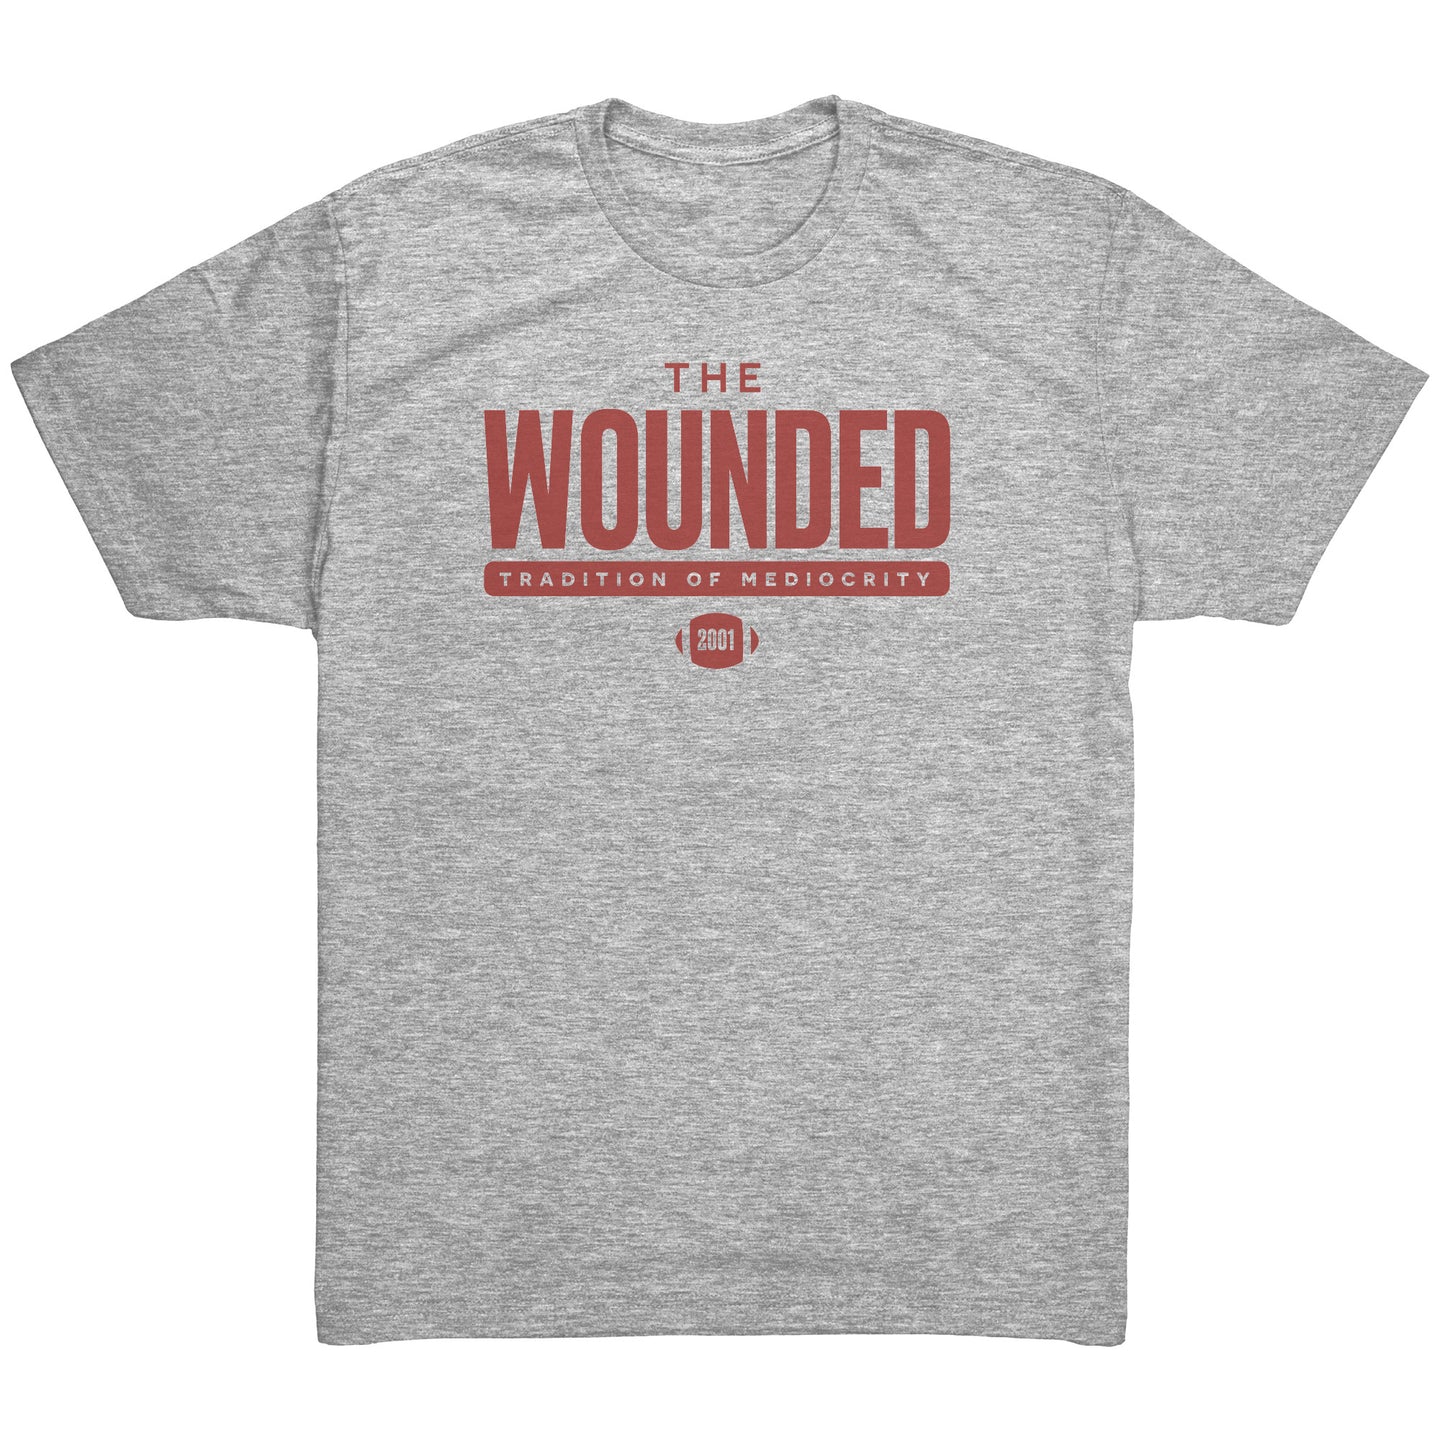 WOUNDED! t-shirt